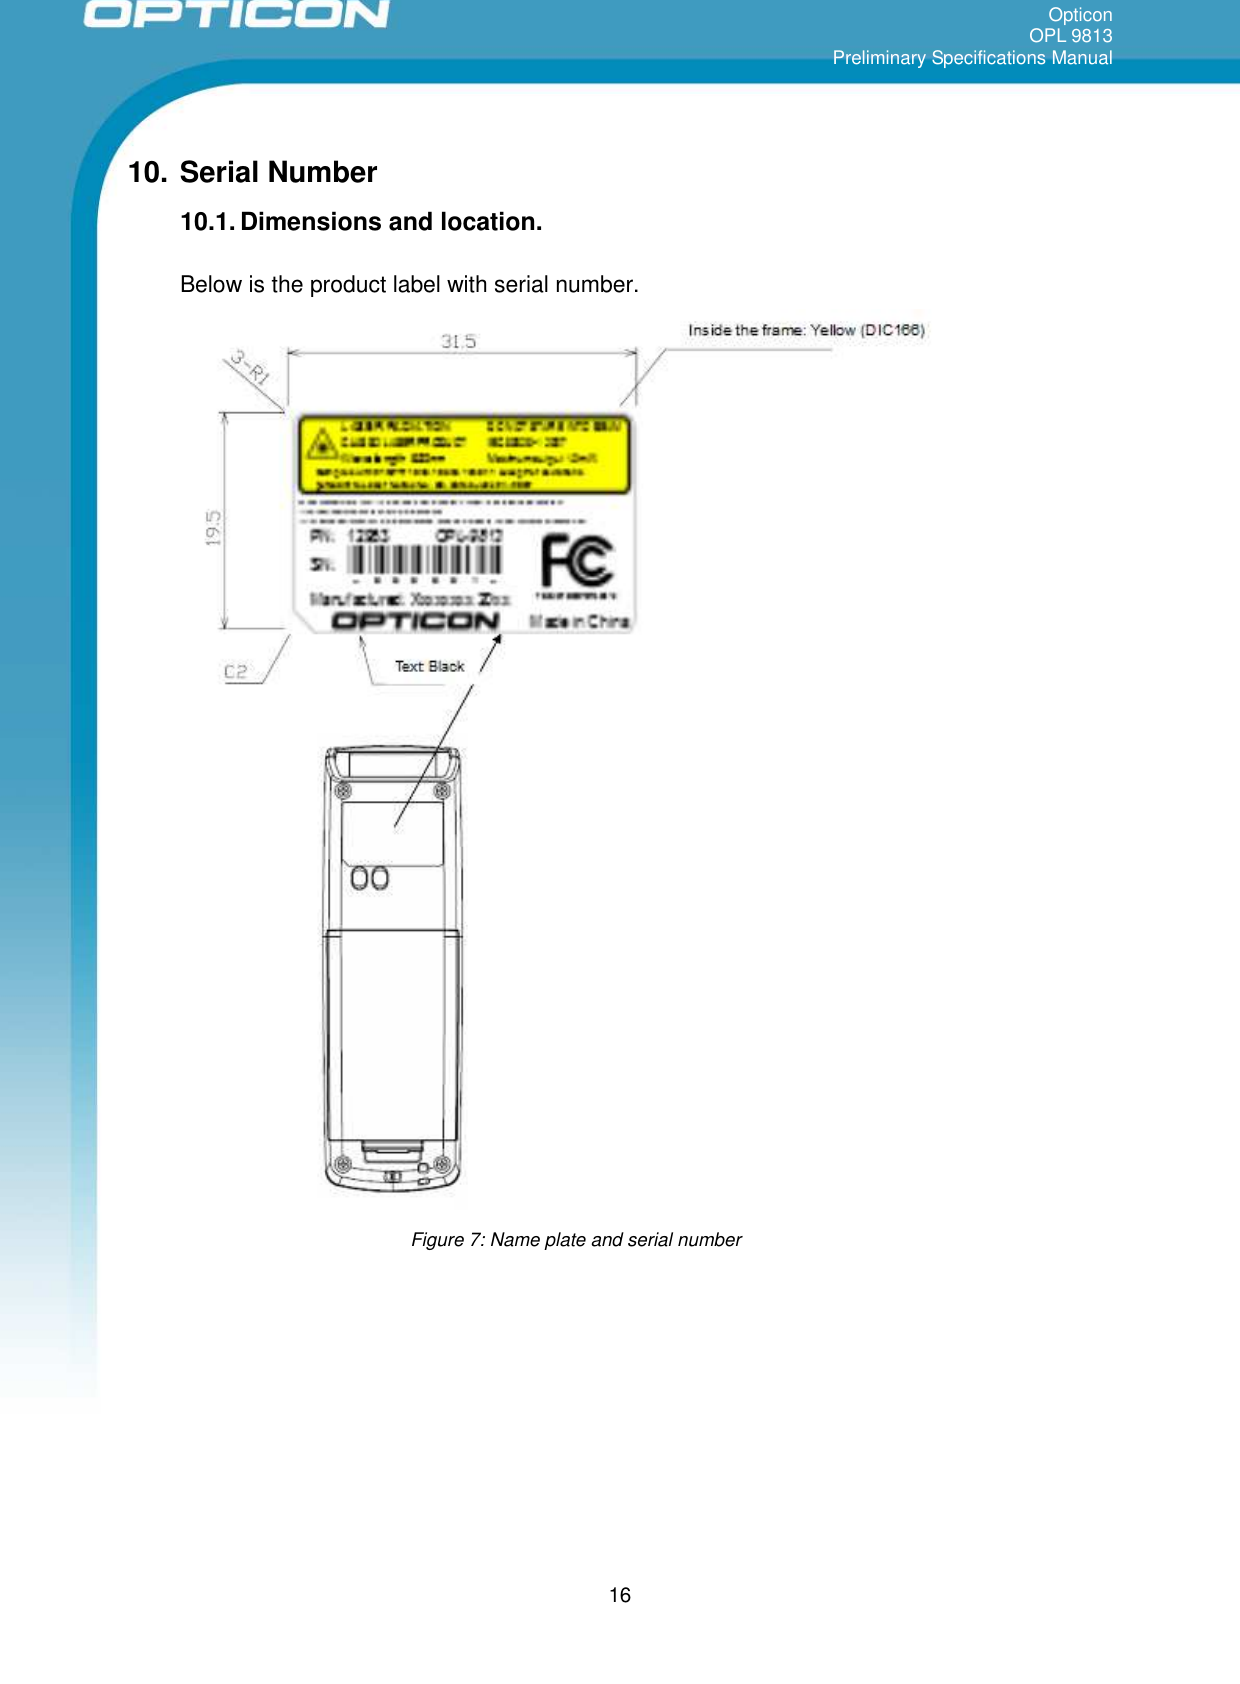 OpticonOPL 9813Preliminary Specifications Manual1610. Serial Number10.1. Dimensions and location.Below is the product label with serial number.Figure 7: Name plate and serial number